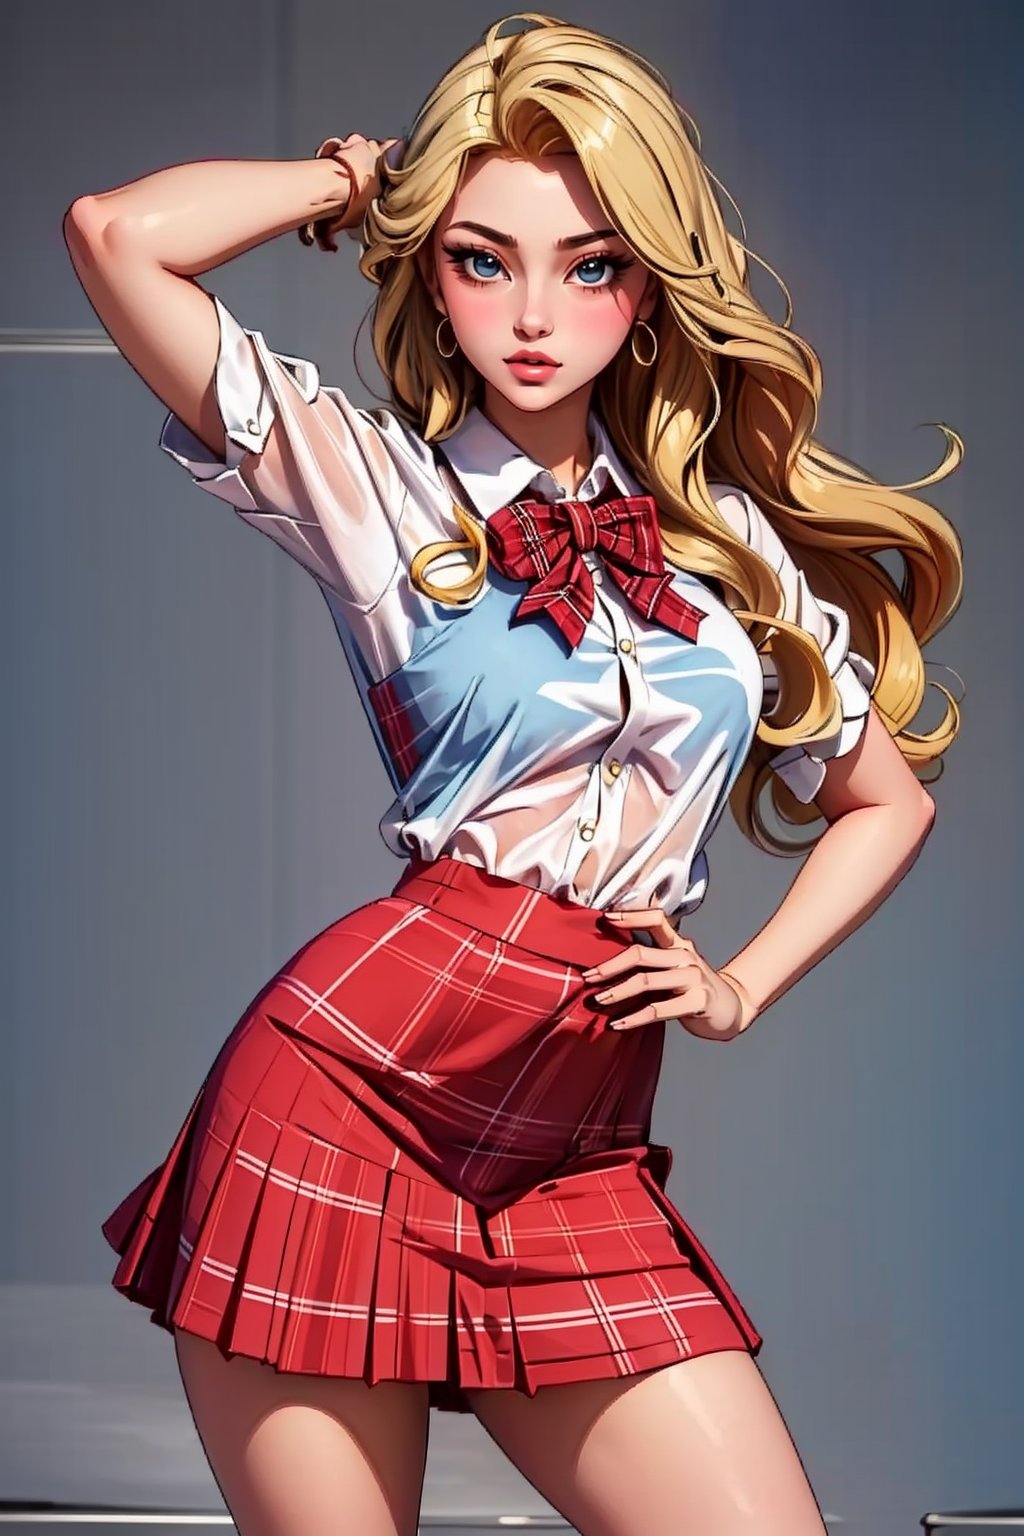 beautiful blonde girl, long hair, wears a high school uniform with a red plaid skirt and white blouse, poses like a super model in a elegant highschool.